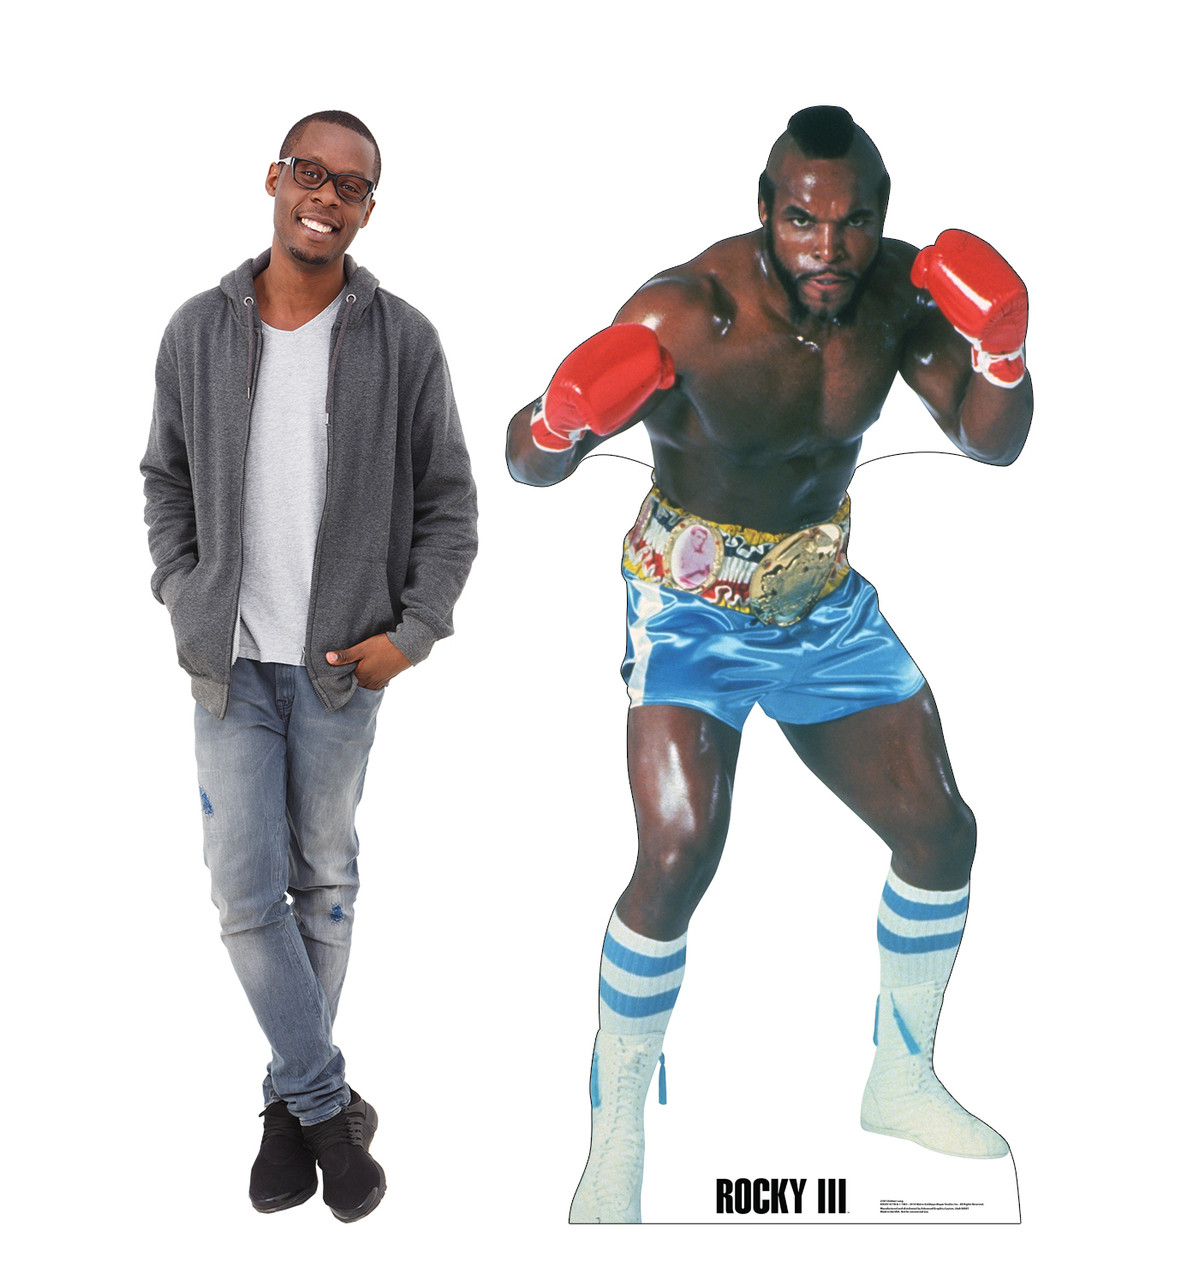 Life-size cardboard standee of Clubber Lang from Rocky III with model.